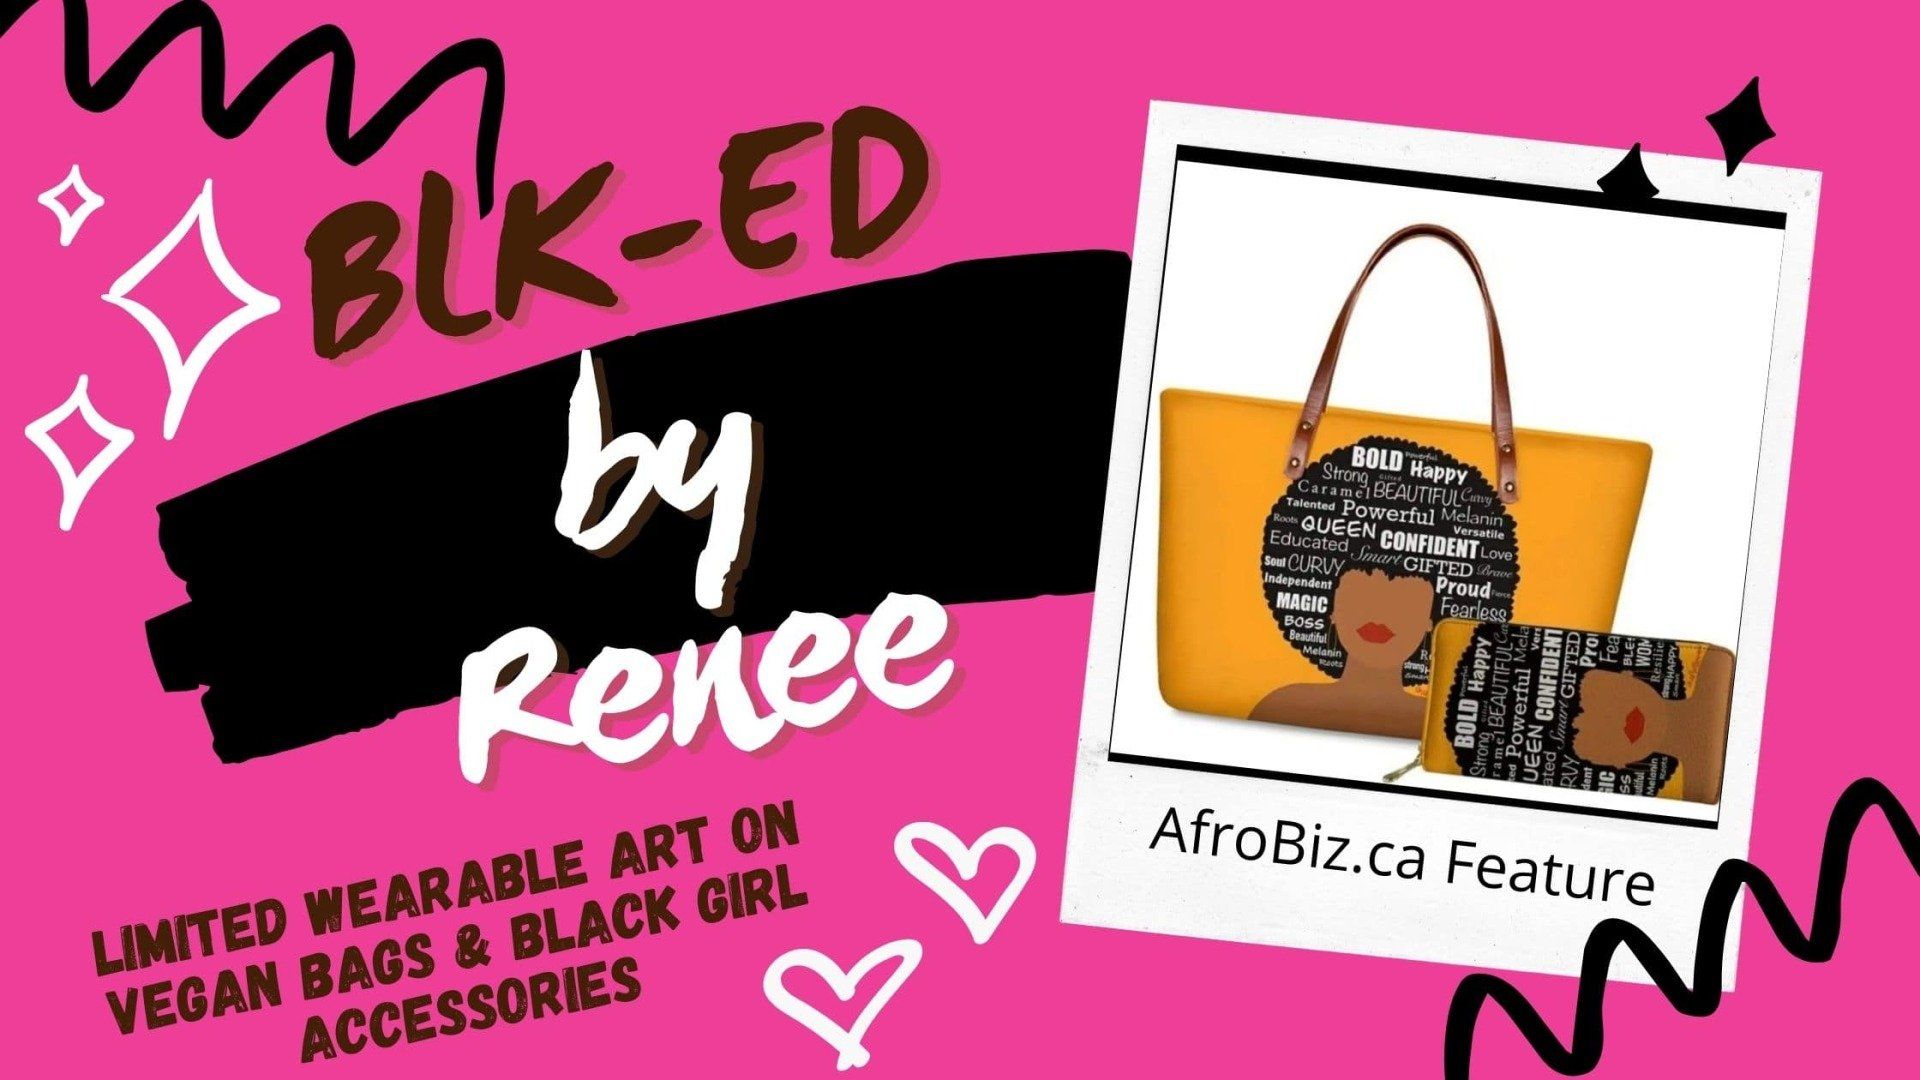 BLK-ED is Hot! Check out these Cruelty-Free and Vegan Leather Handbags and Black Girl Art